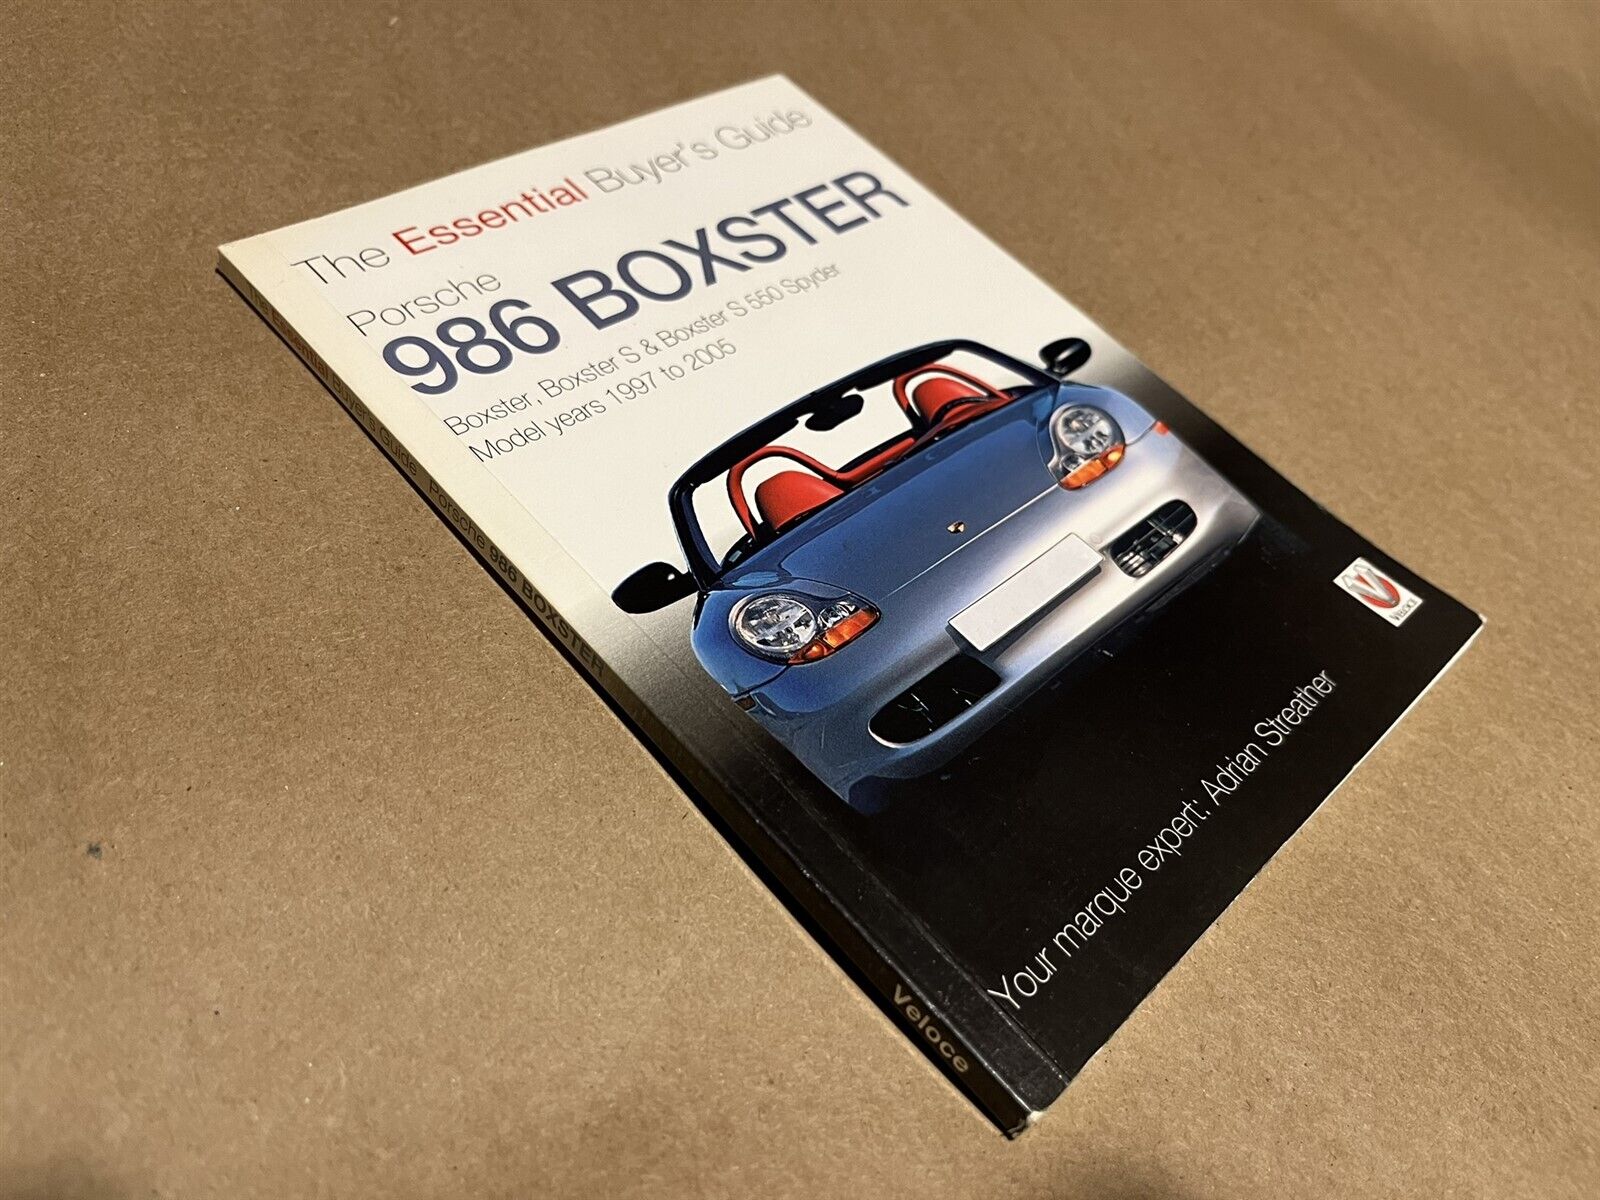 Book Porsche 986 Boxter The Essential Buyer's Guide by Streather 2012